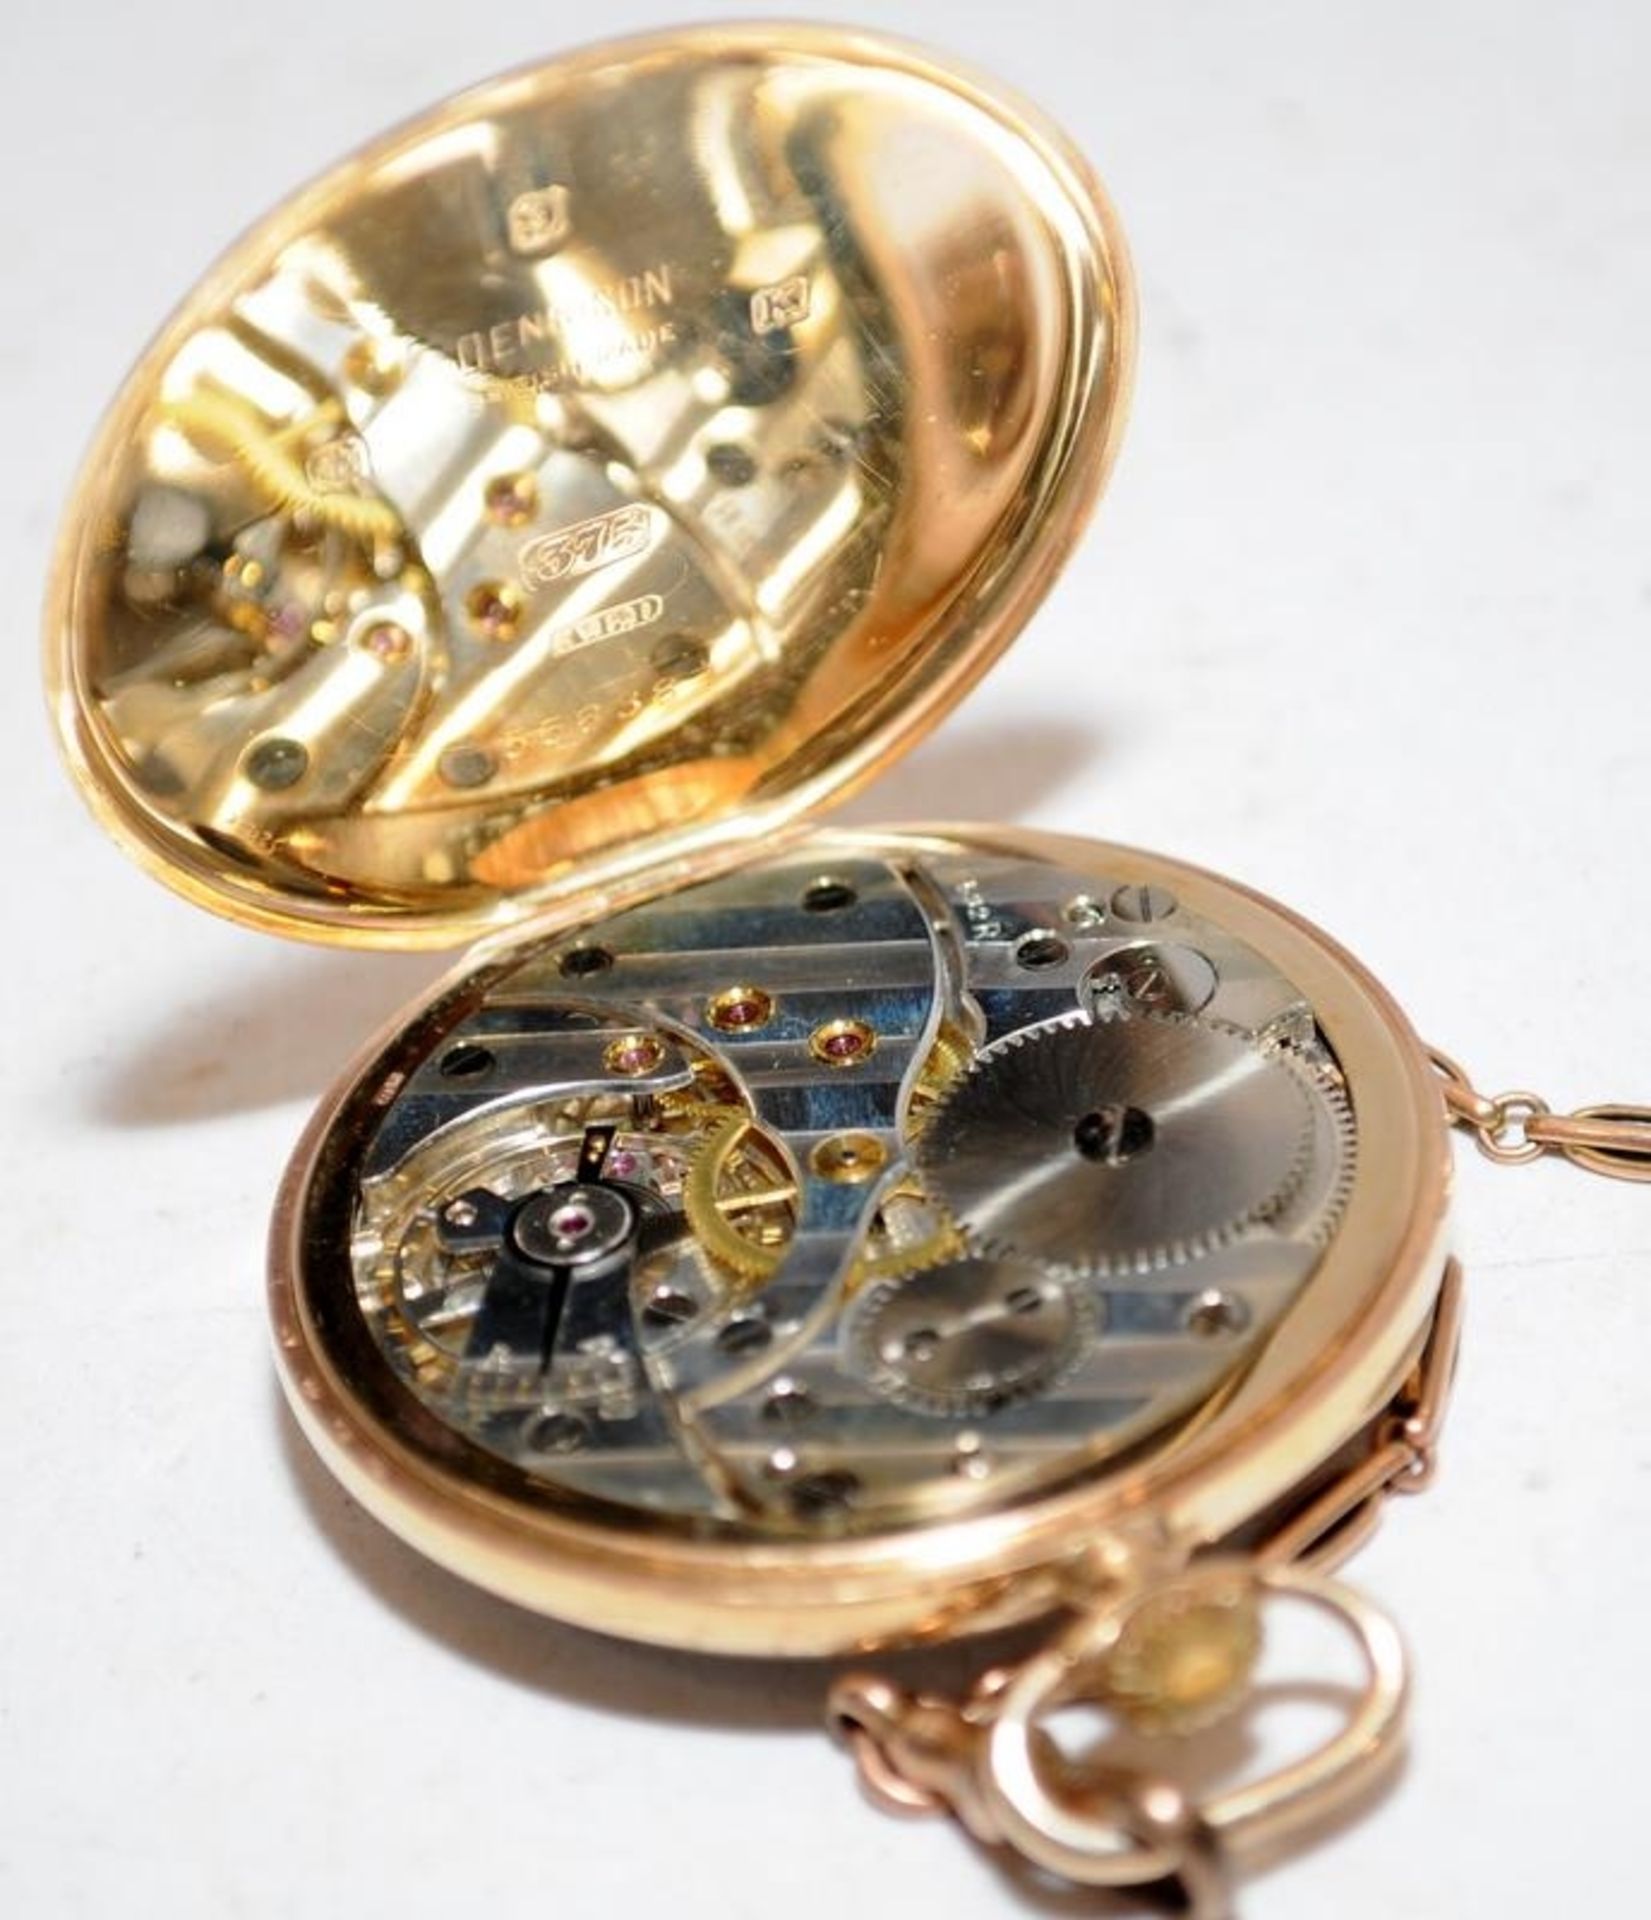 Vintage open face pocket watch in 9ct gold Denison case c/w 9ct gold chain. Chain length 34cms, - Image 4 of 4